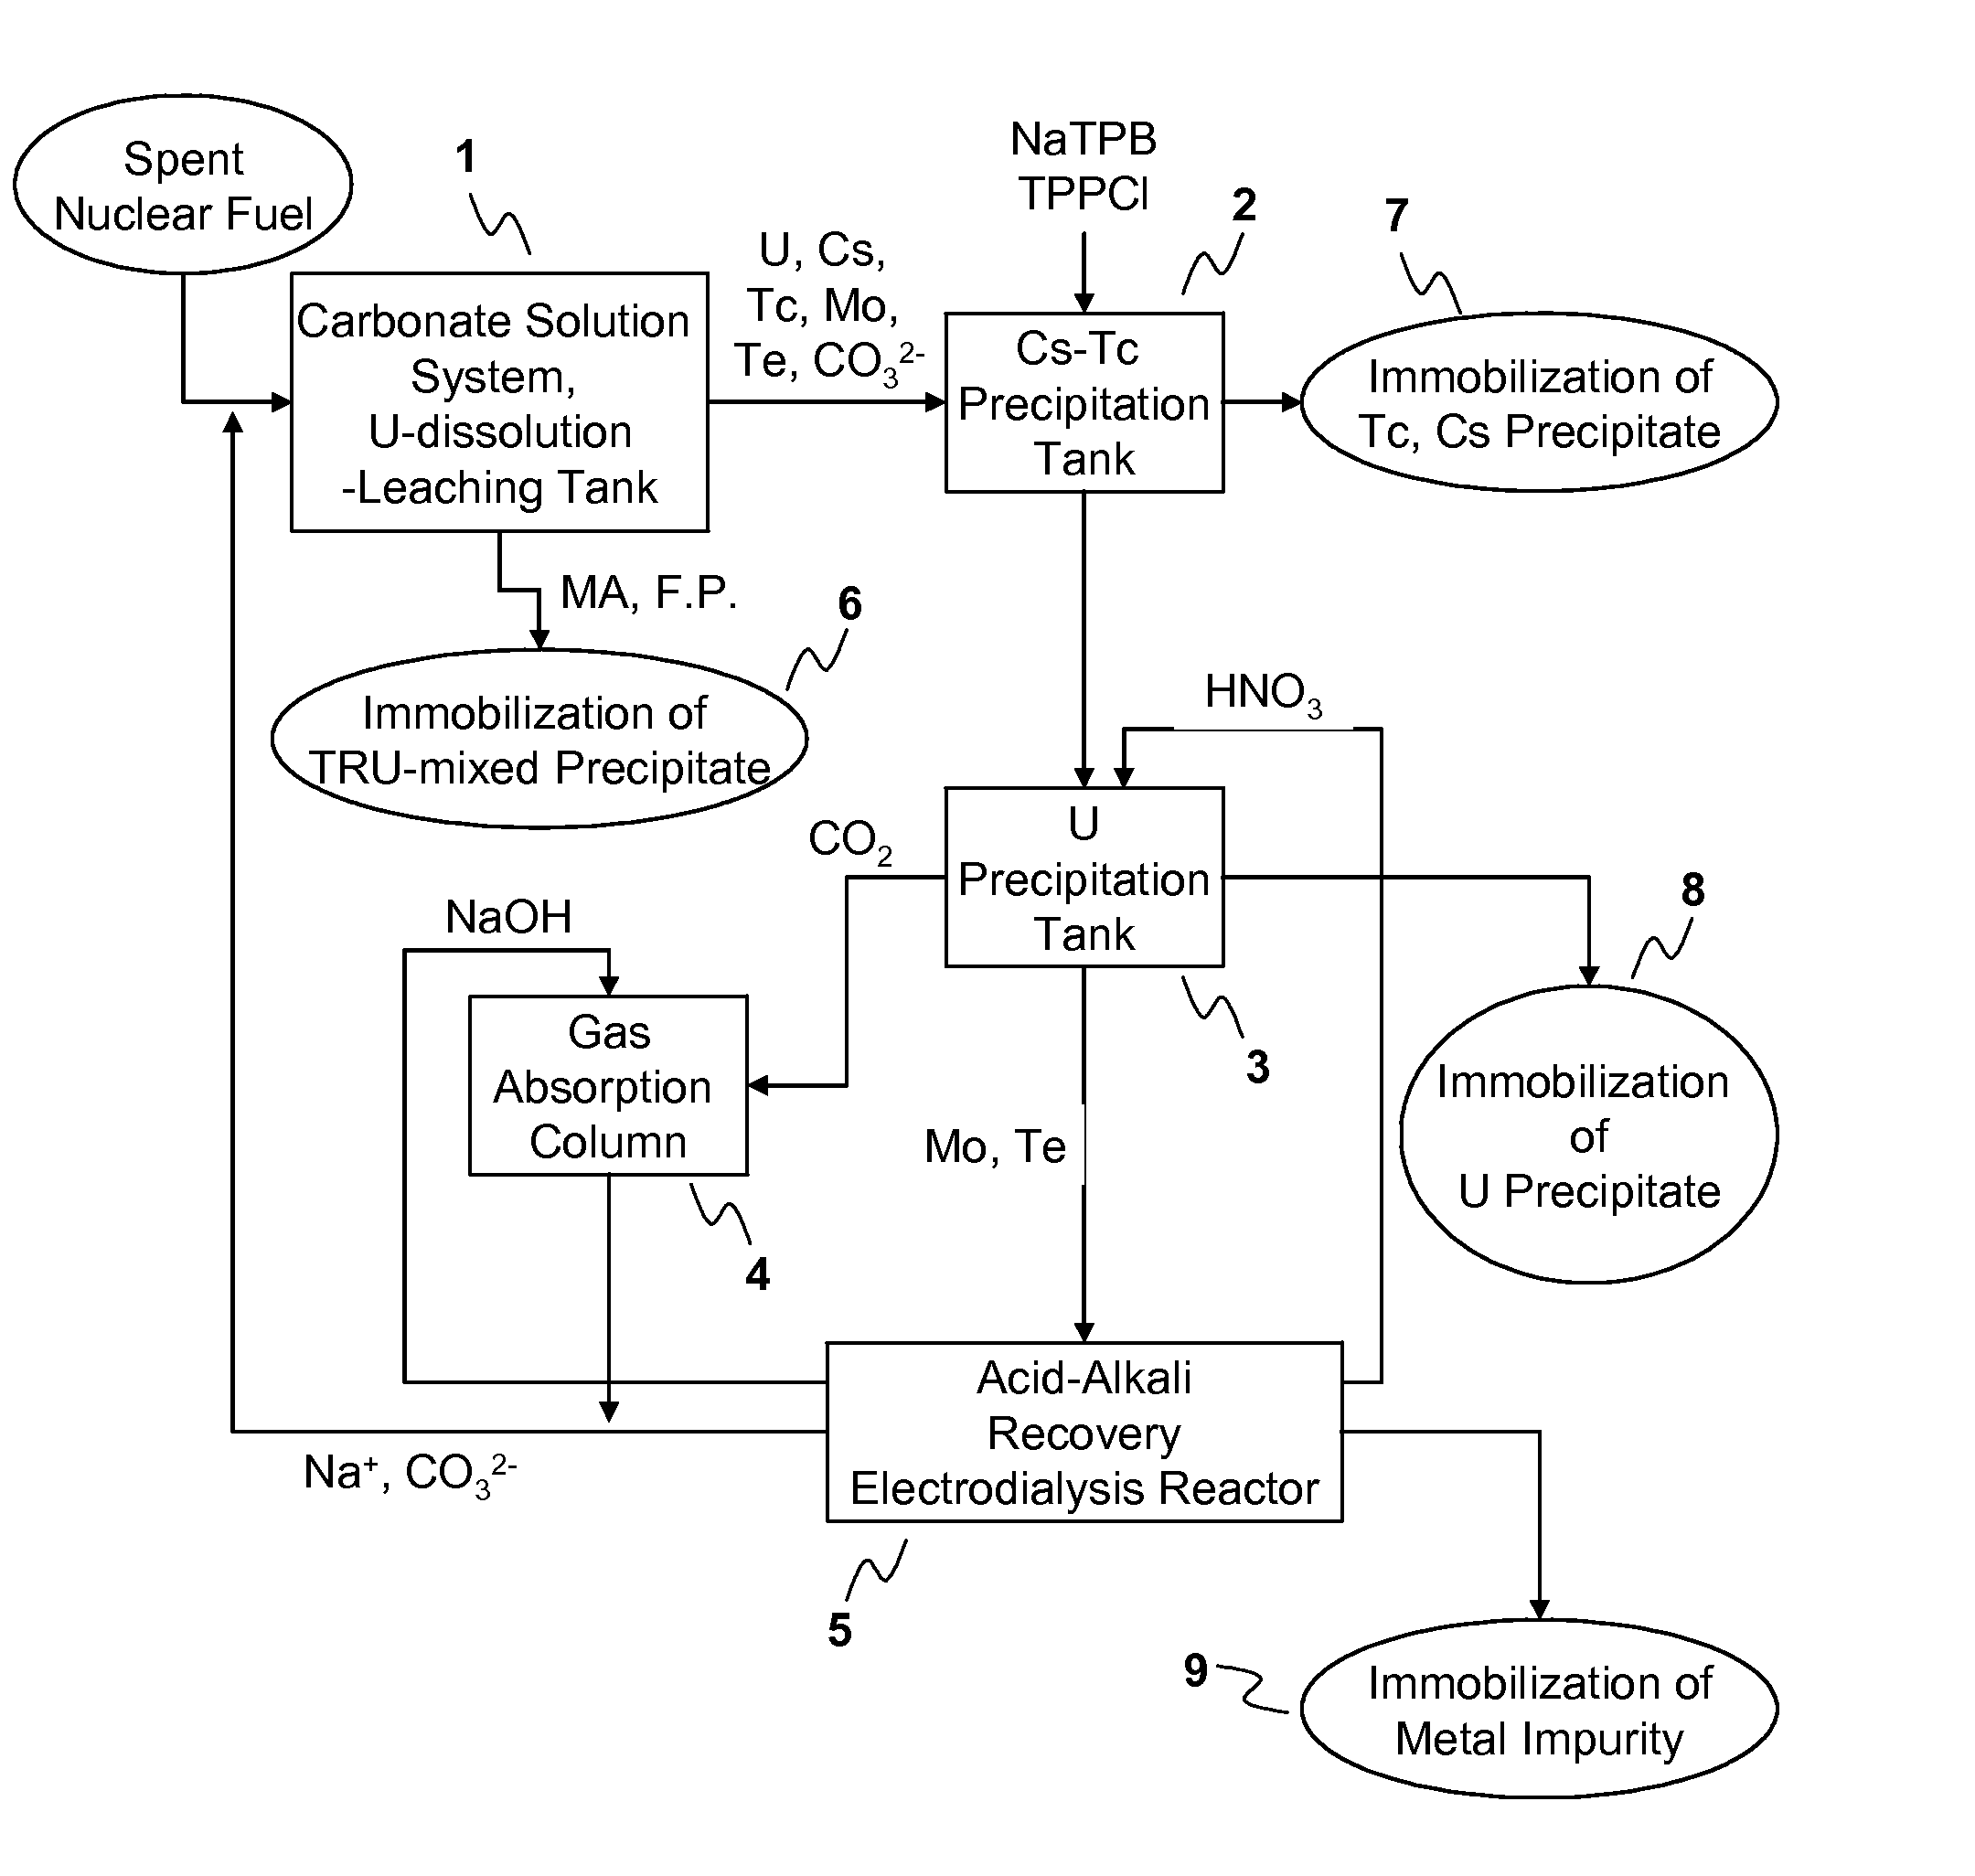 Process for Recovering Isolated Uranium From Spent Nuclear Fuel Using a Highly Alkaline Carbonate Solution